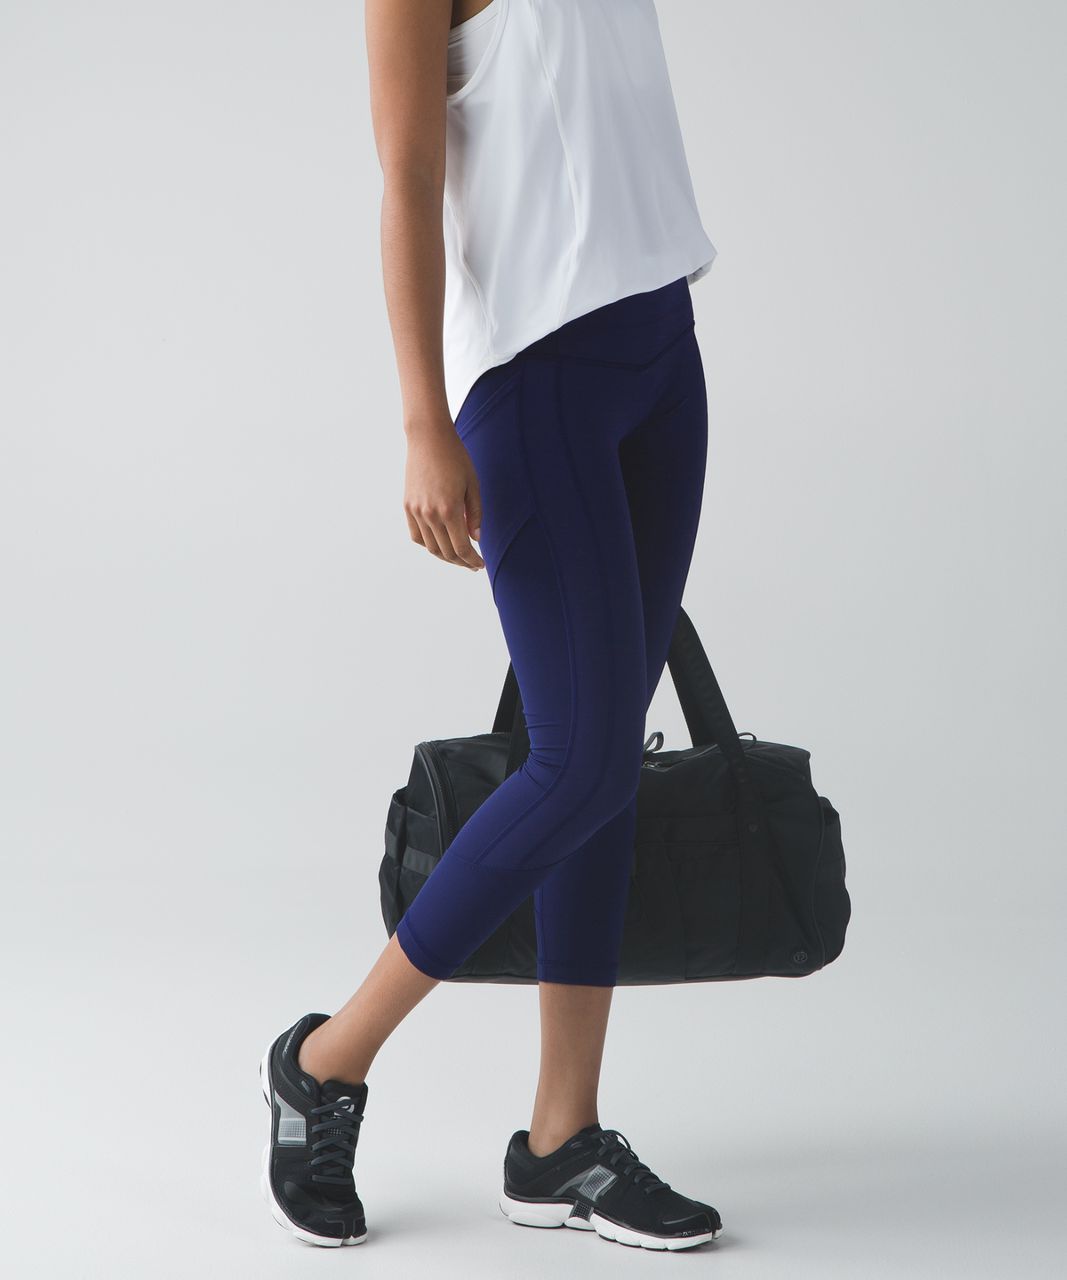 Lululemon All The Right Places Crop II - Hero Blue